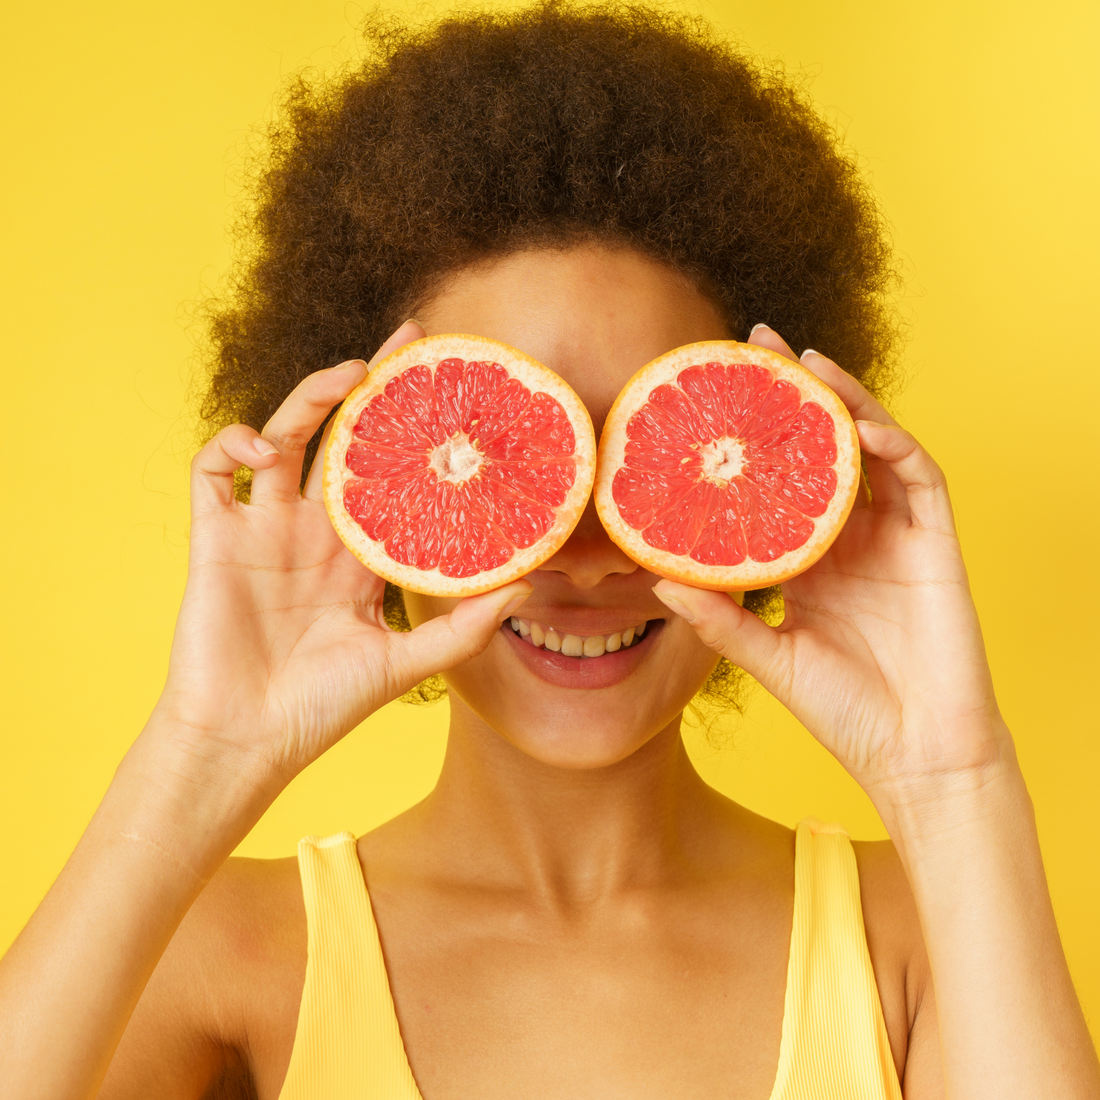 10 Reasons to Get Your Vitamin C Dose